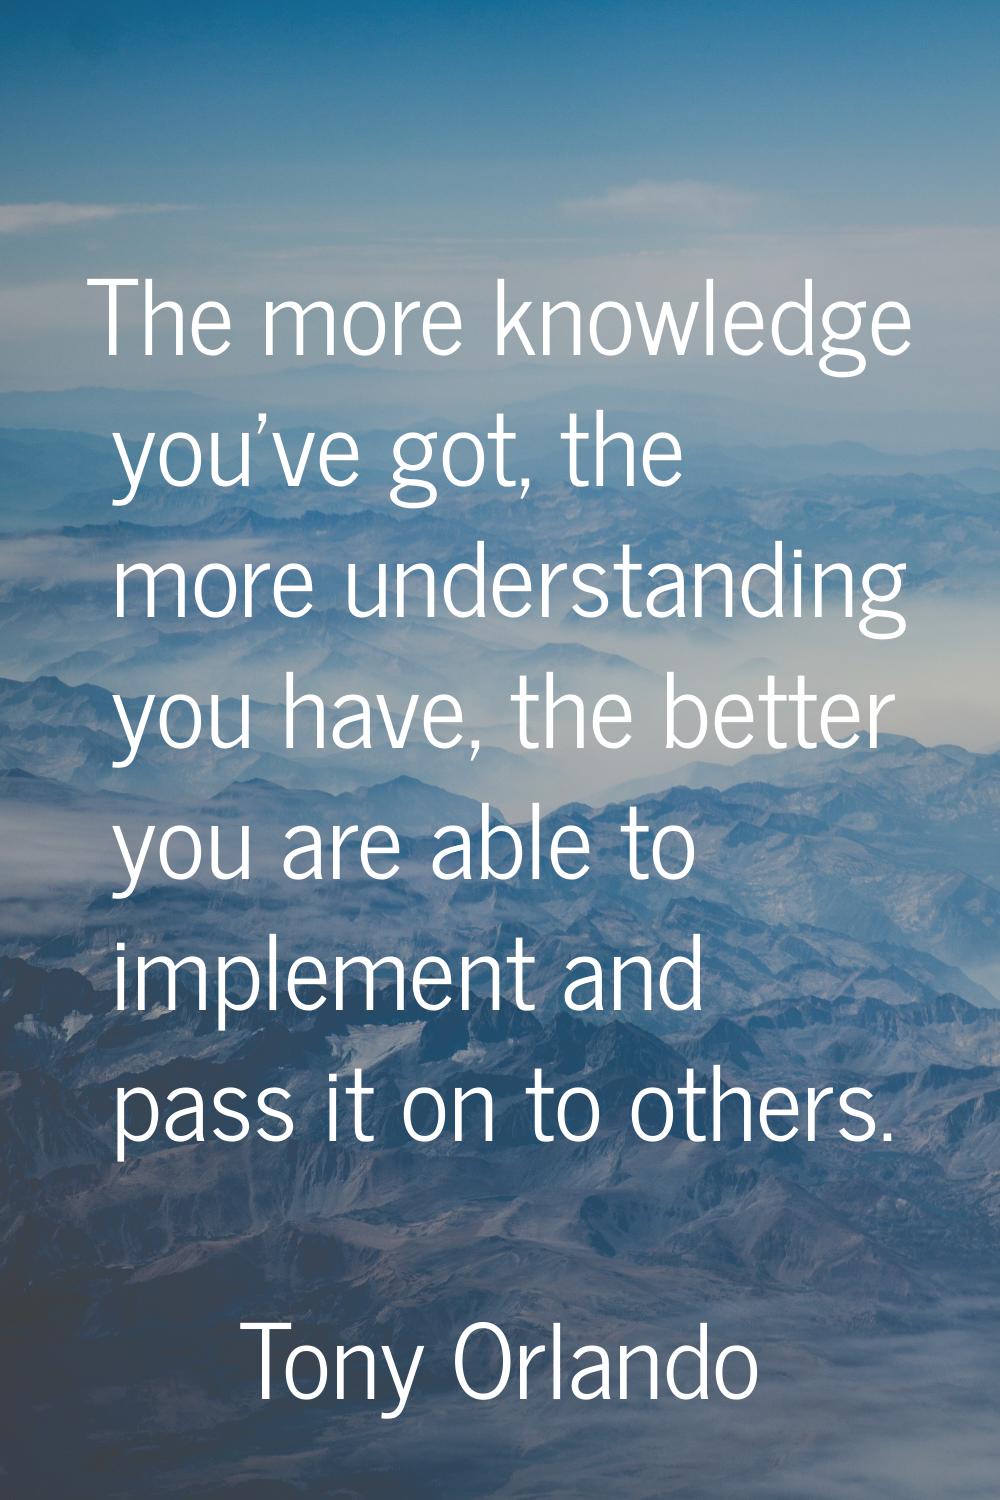 The more knowledge you've got, the more understanding you have, the better you are able to implemen